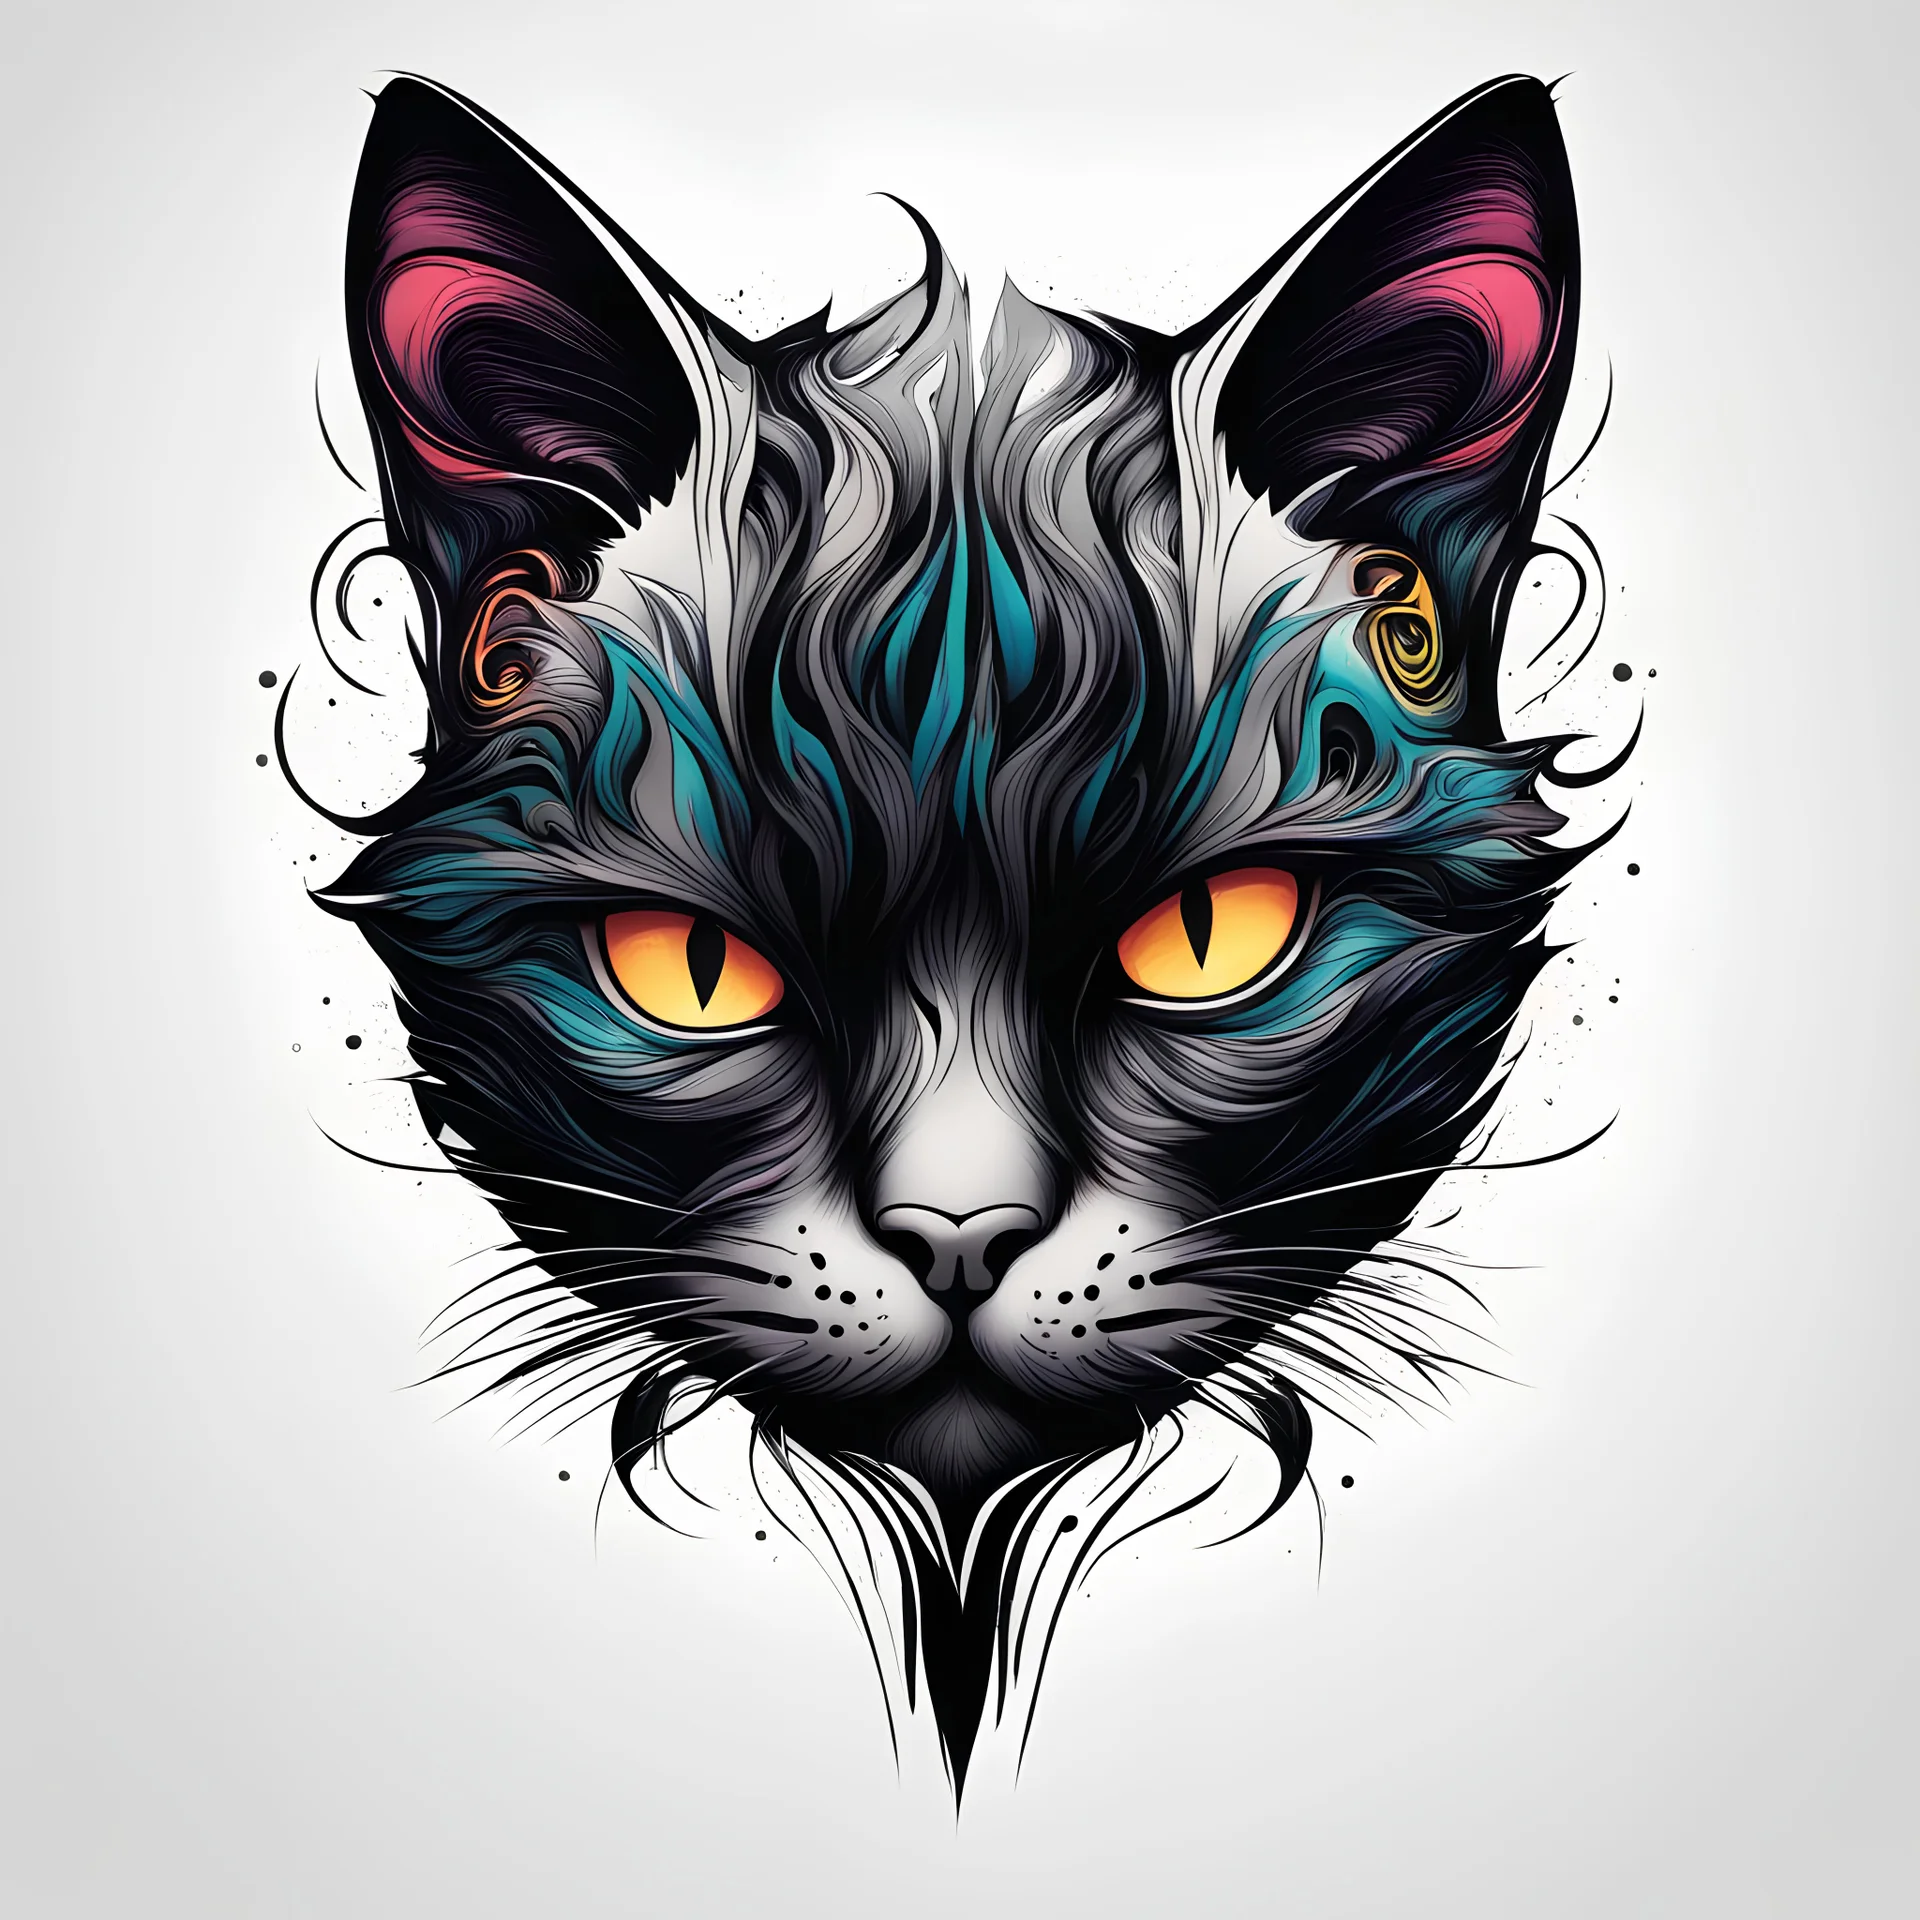 modern abstract vivid color tattoo ideas, simple minimalistic illustration on a pure white background < "The head of a tattooed black cat. dynamic image">